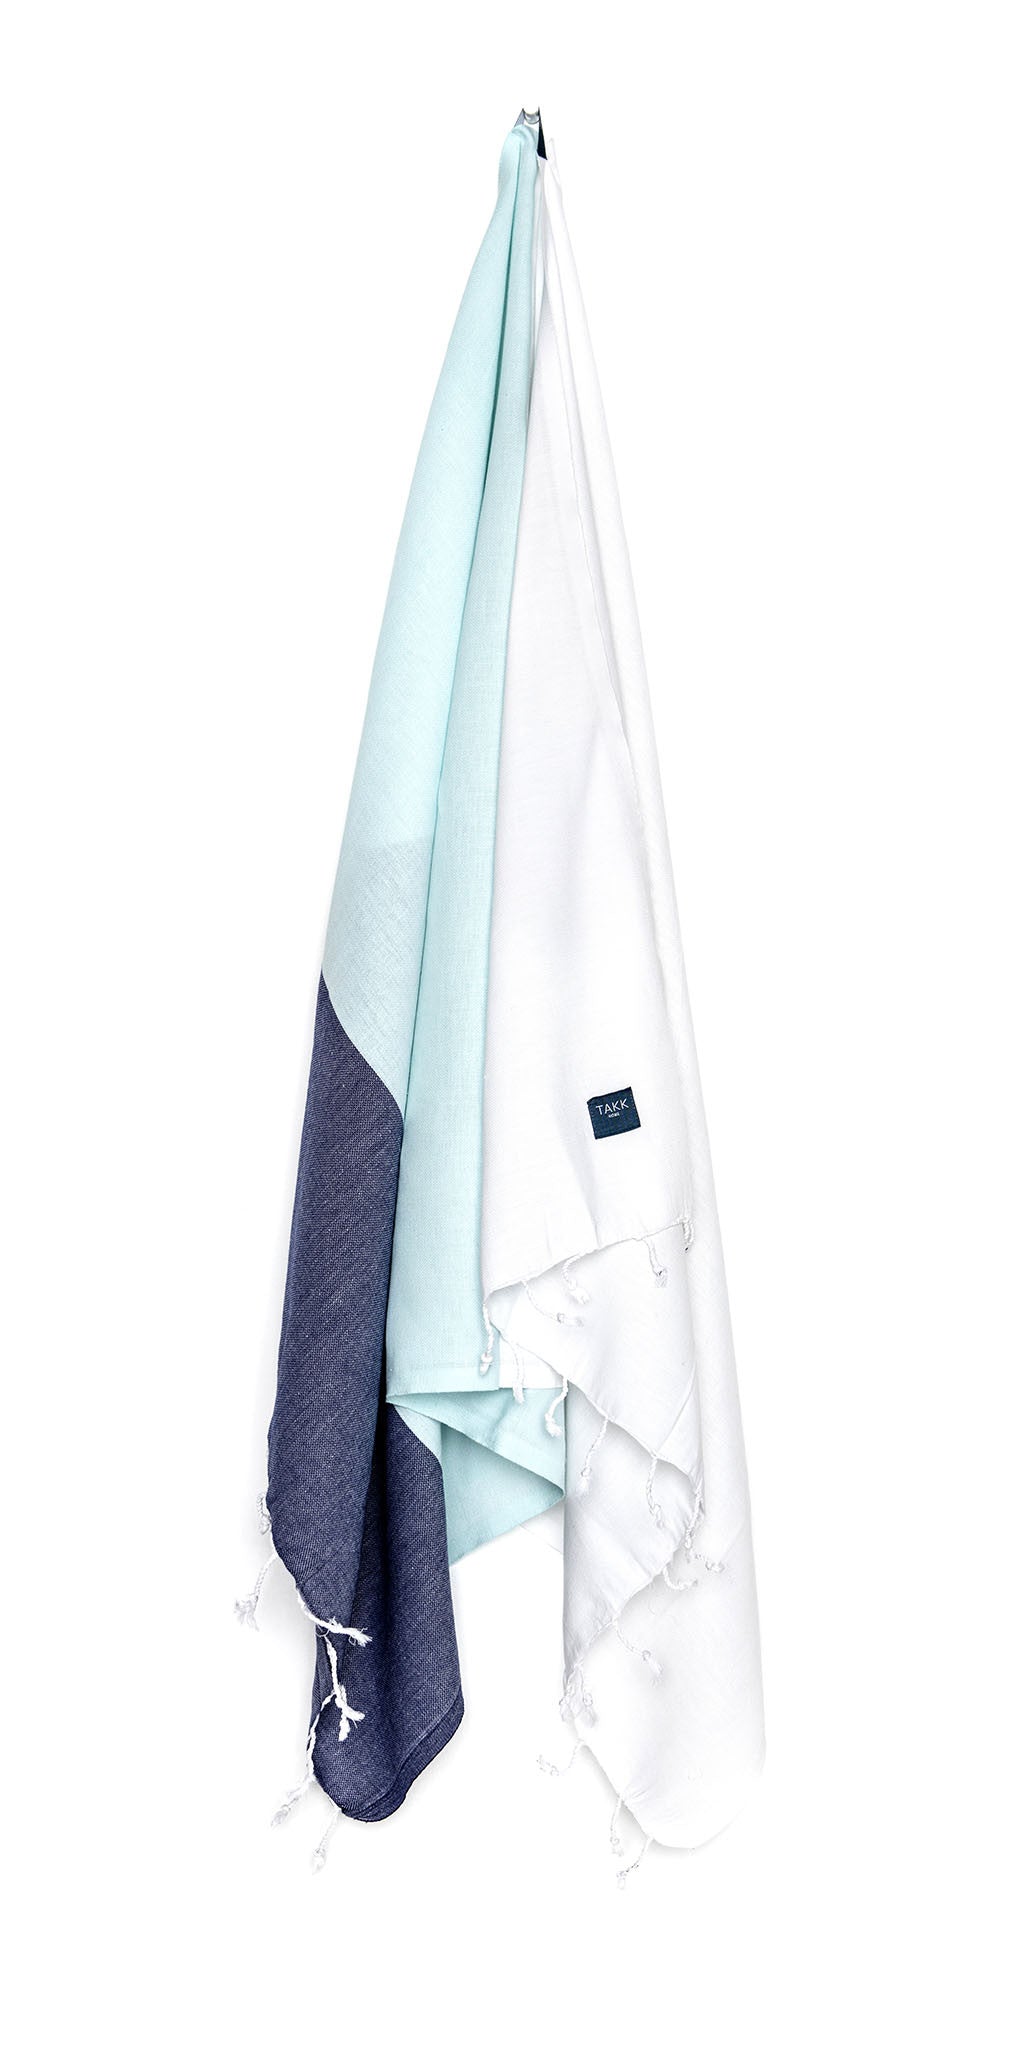 Luxurious hamam bath towel. Soft, absorbent, light weight, quick drying, aesthetically pleasing. Takes up little space. Ideal for bath, beach, travel, sports, yoga. Can also be used as a blanket or a scarf. Popular as a baby blanket.  OEKO-TEX®, eco-friendly certification. 100% quality cotton. White, navy, mint hammam towel